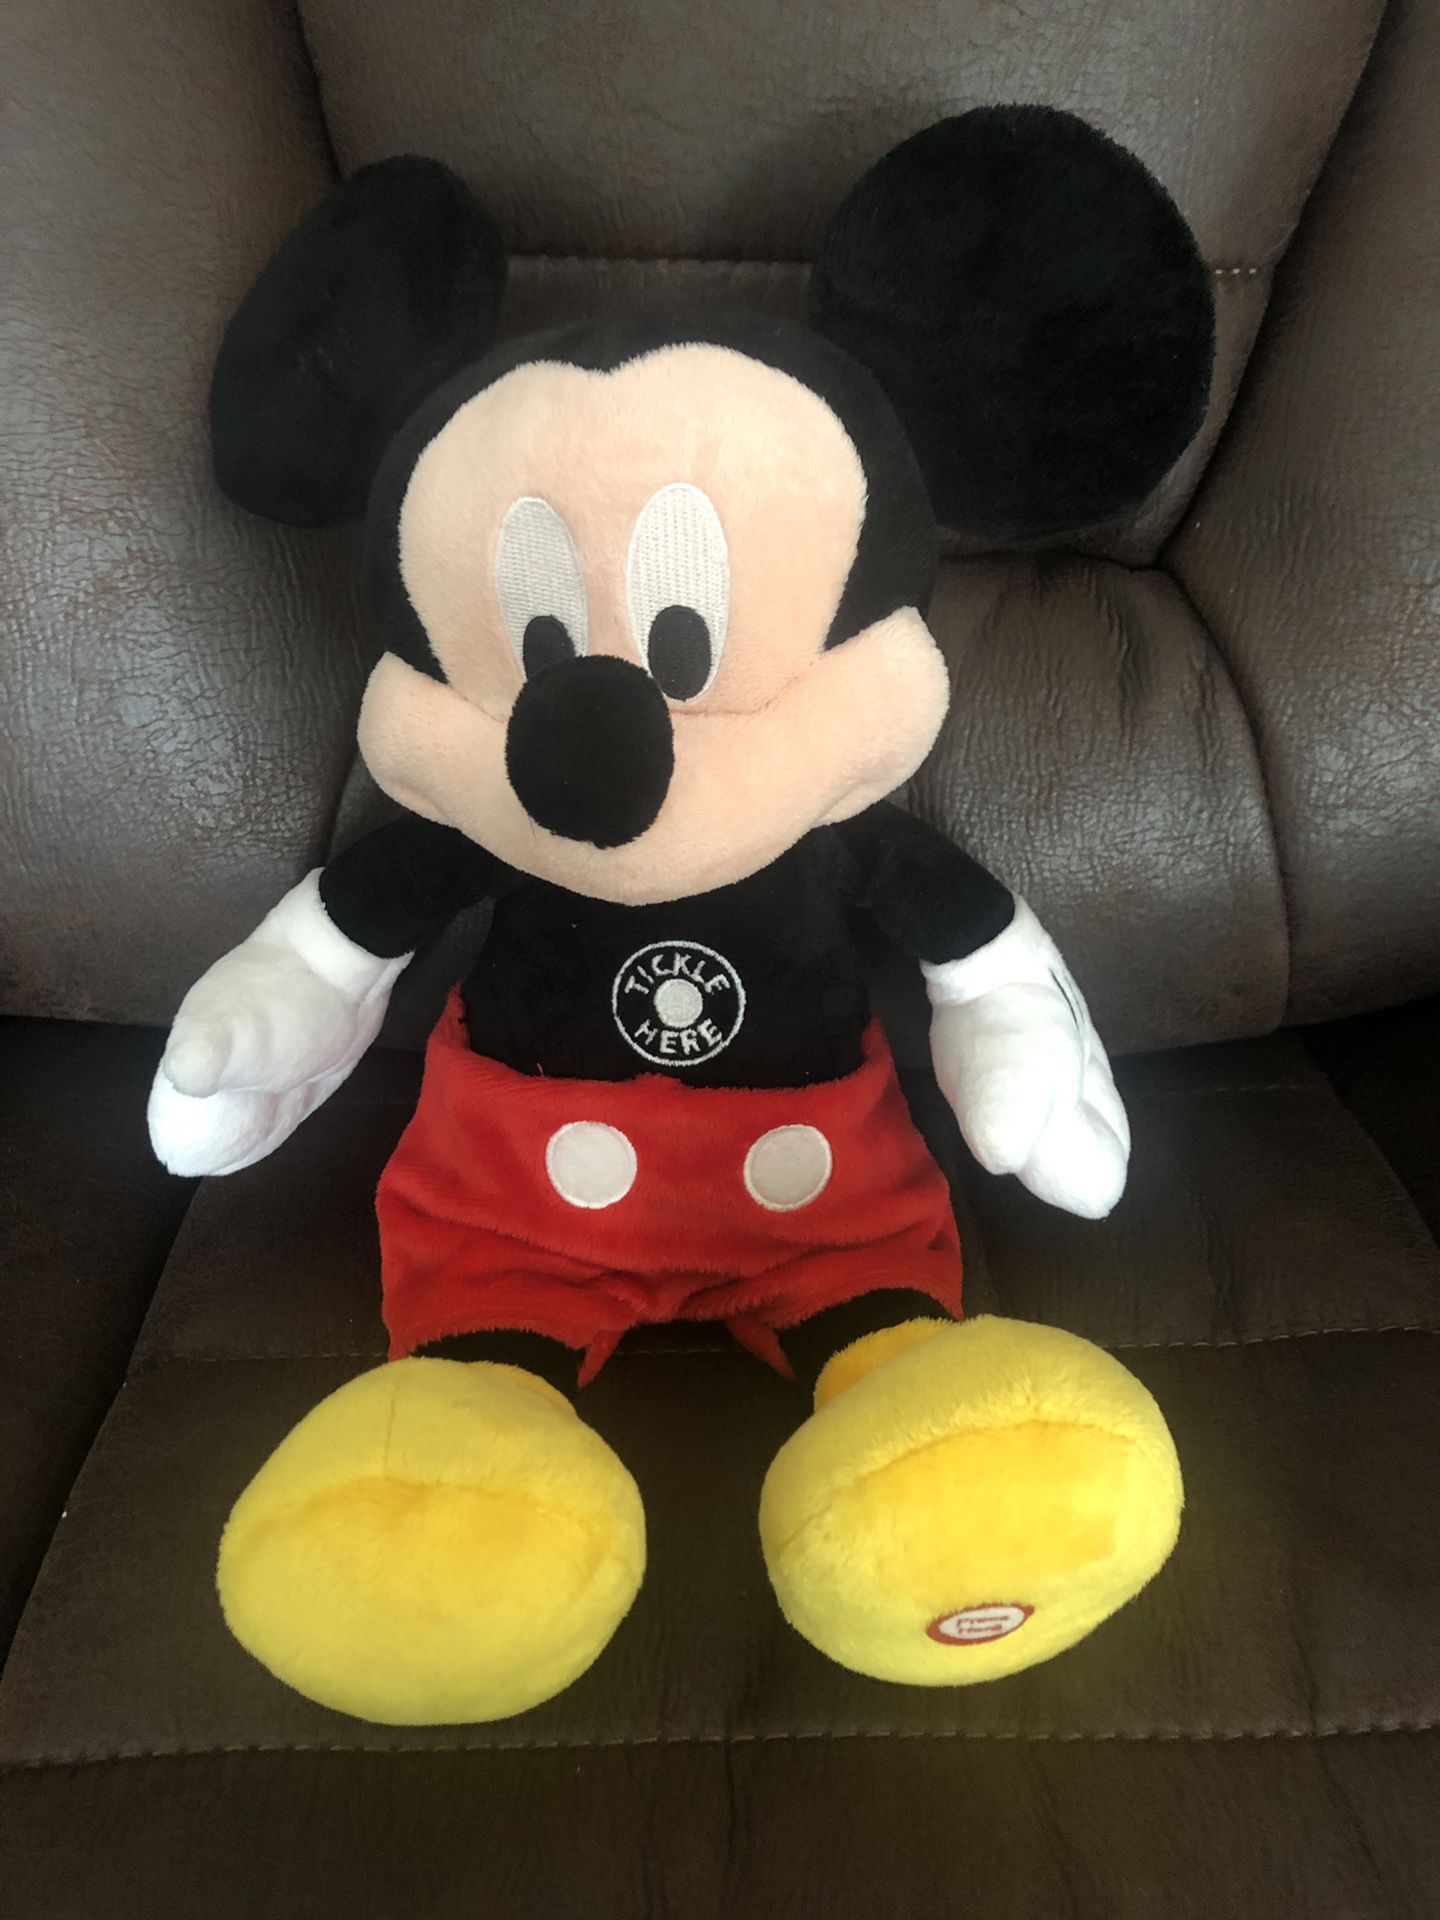 Tickle Me Mickey Mouse by Hallmark